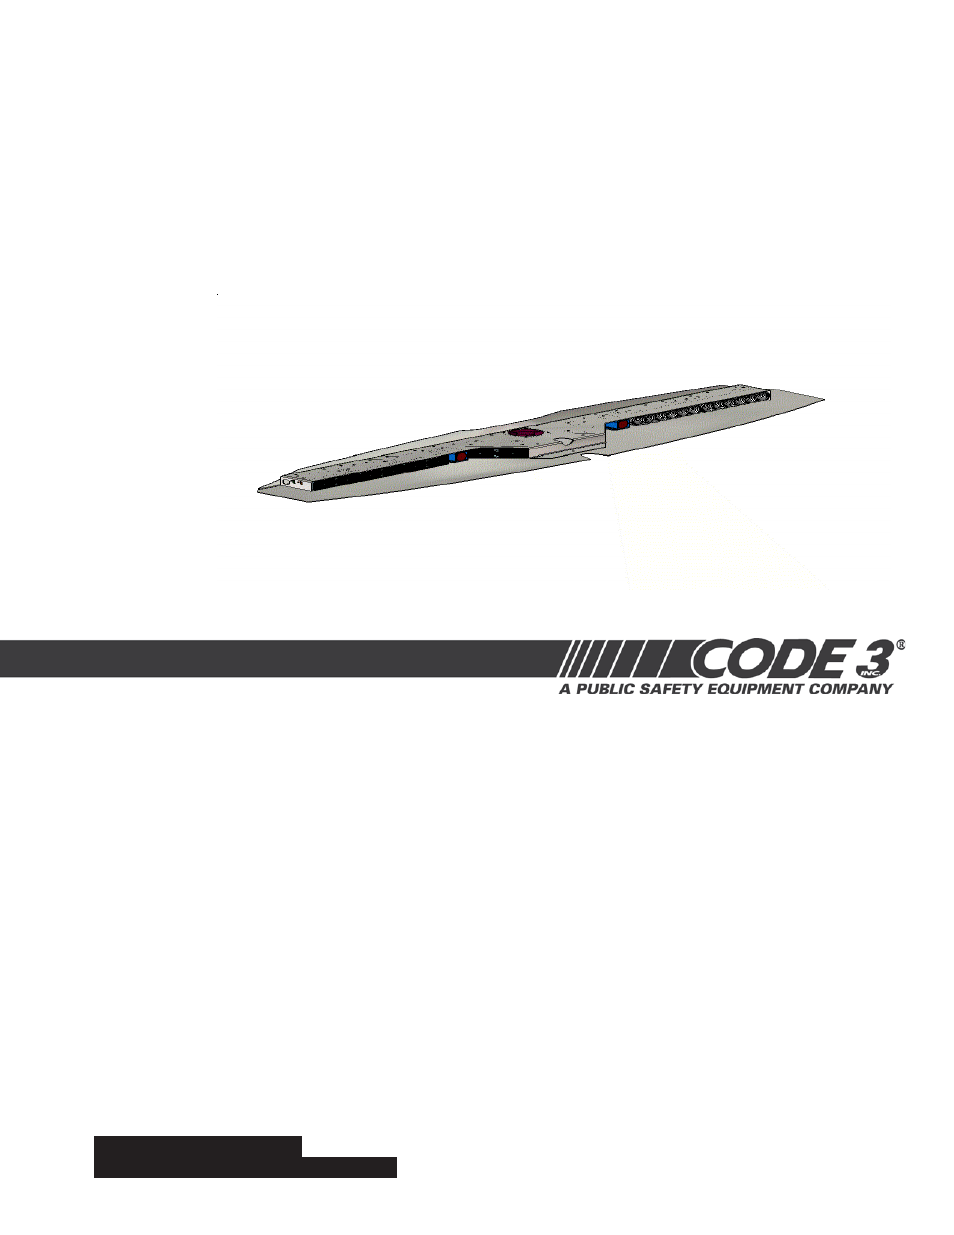 Code 3 Supervisor Tl For Chevy Impala User Manual